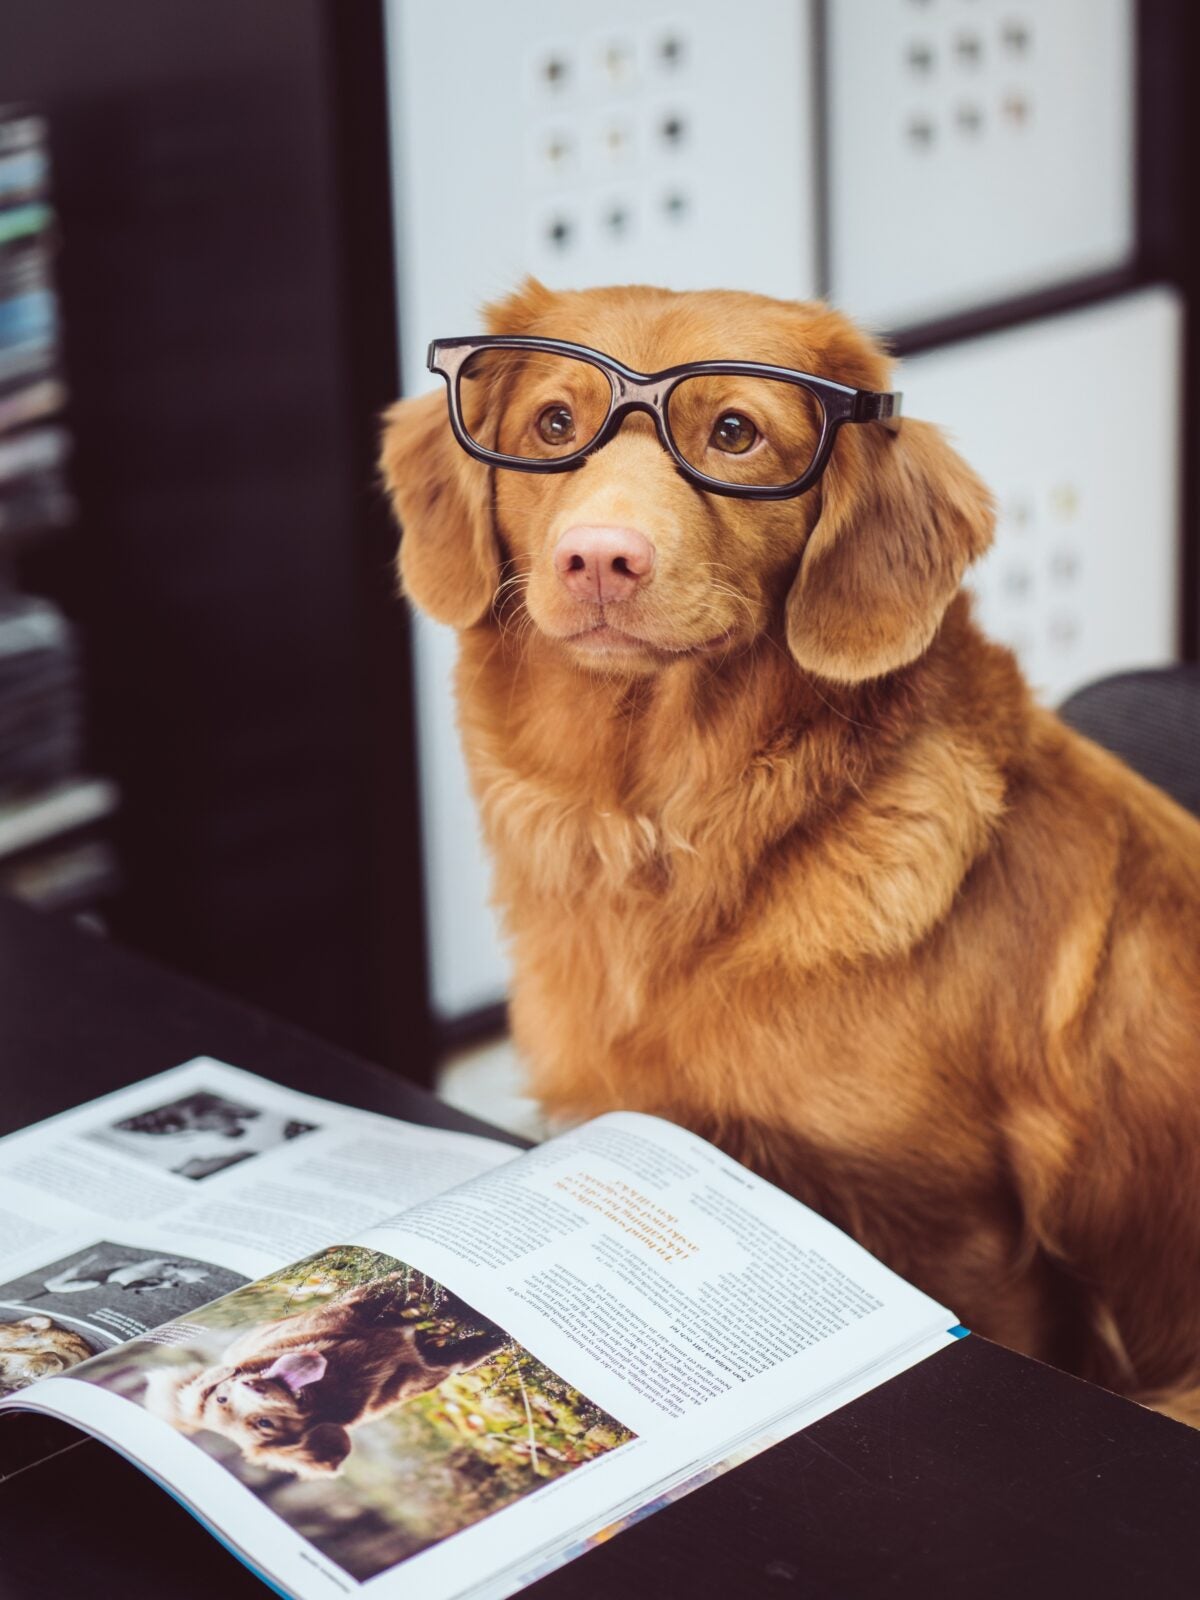 A dog wearing glasses and sitting in front of an opened book.